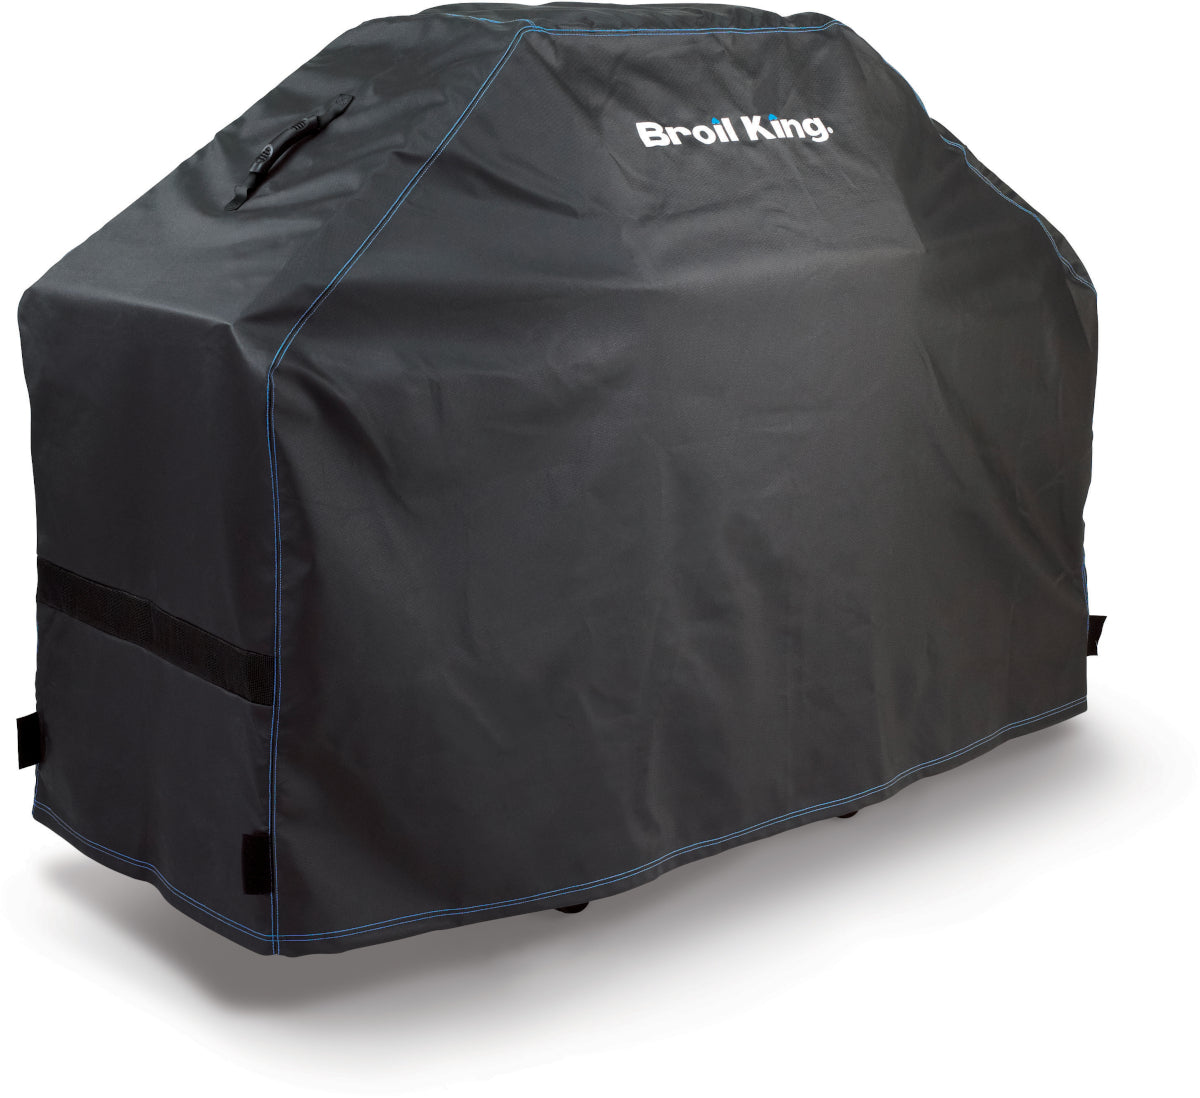 Broil King Premium Cover - Fits Baron 440/490, Signet 300 series, Crown 400's, CART 400's